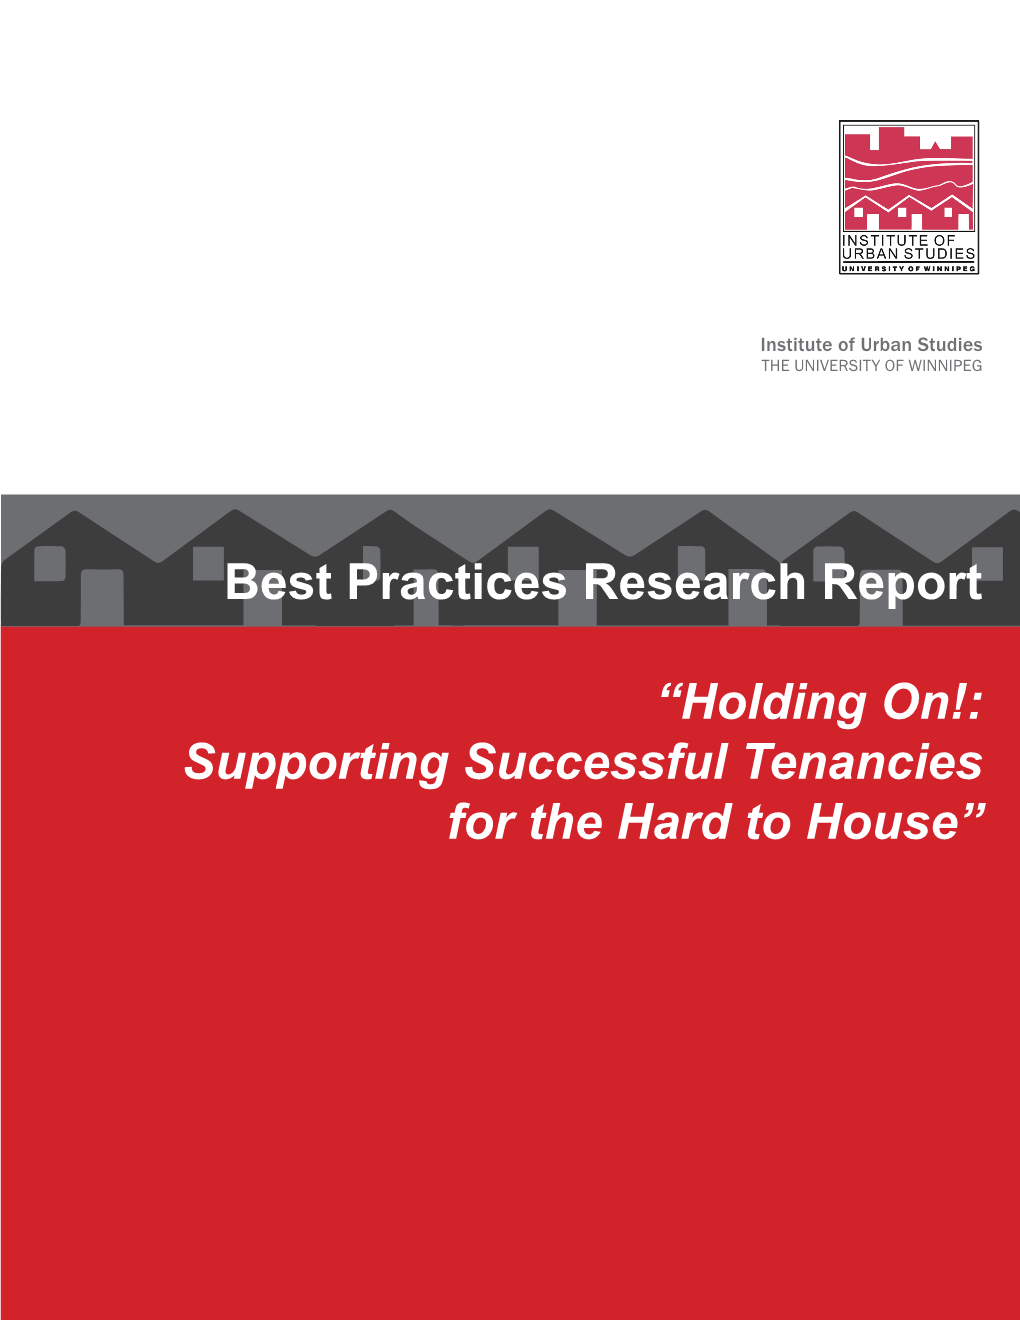 Holding On!: Supporting Successful Tenancies for the Hard to House”